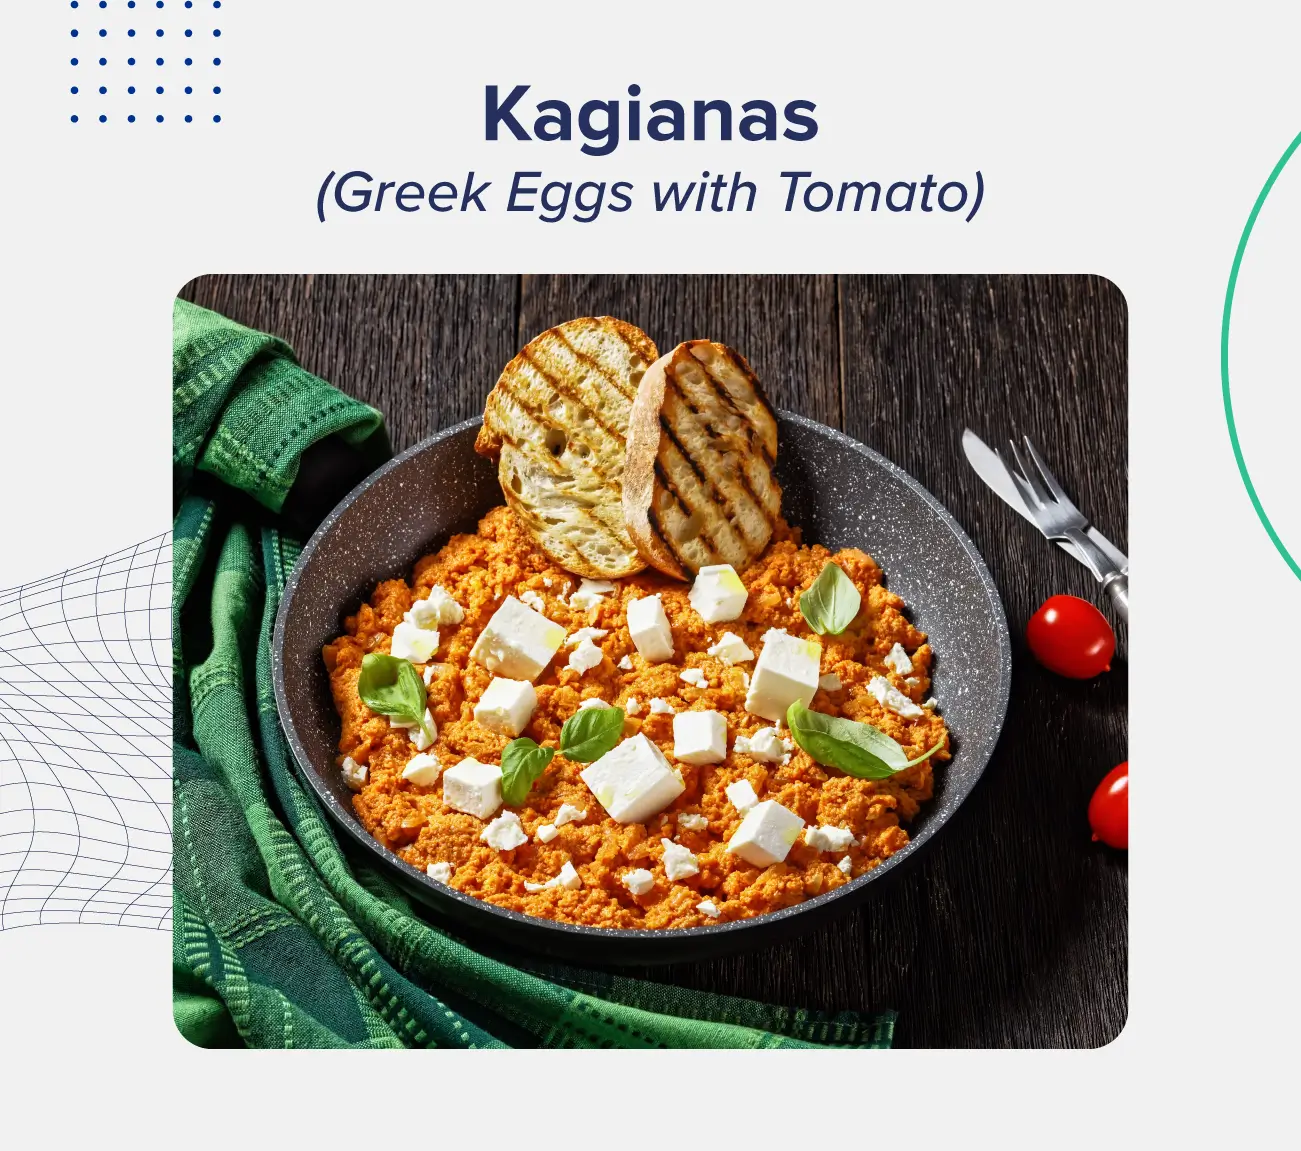 A graphic entitled "Kagianas (Greek Eggs with Tomato)," depicting a bowl filled with scrambled eggs made red from tomato sauce, feta cheese, and some small toasts